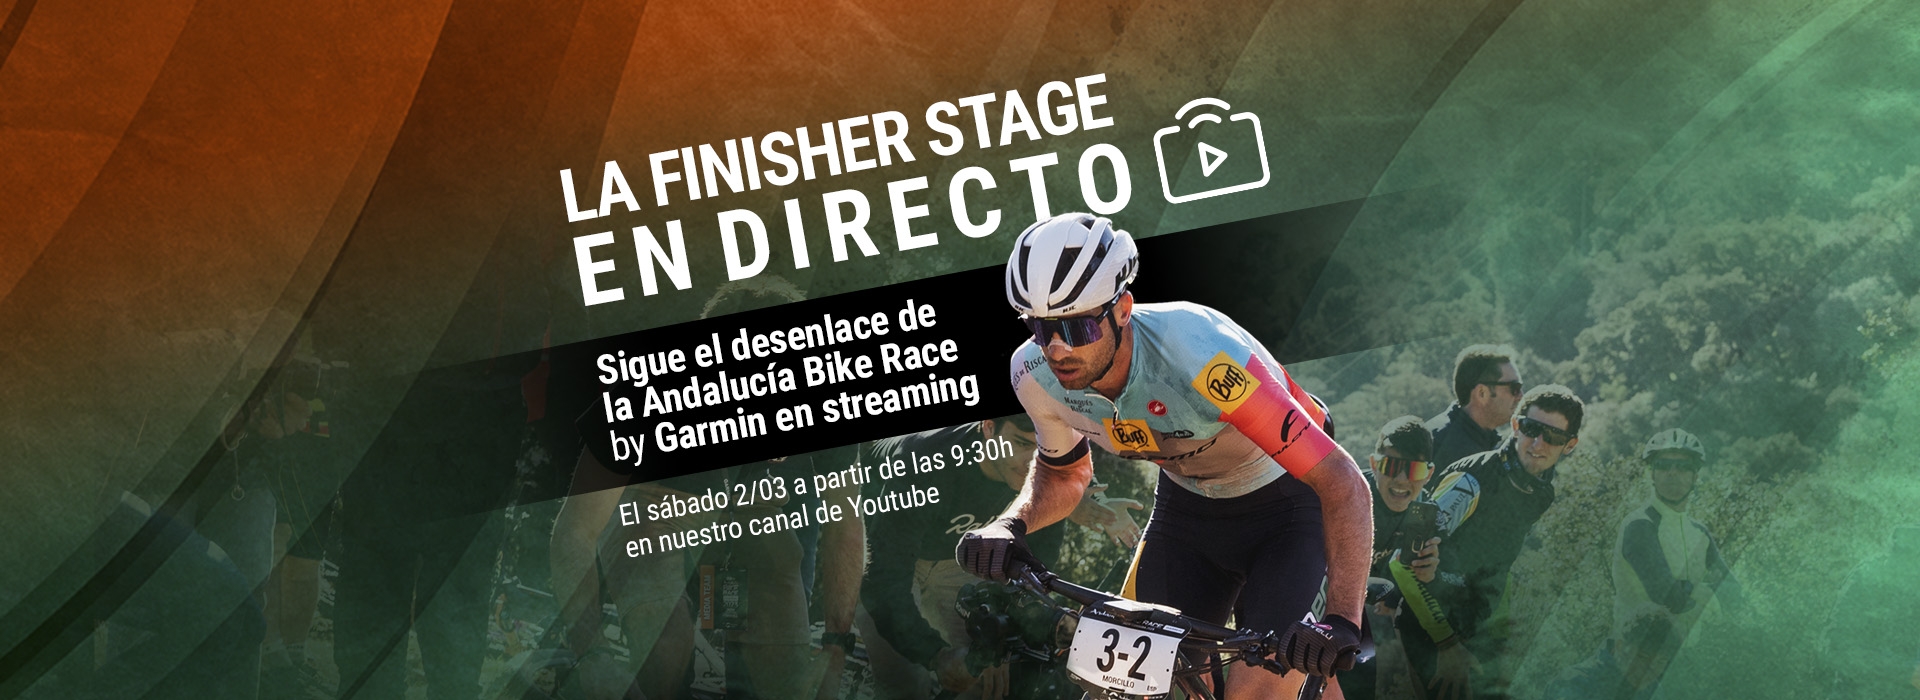 Live streaming of the Finisher Stage